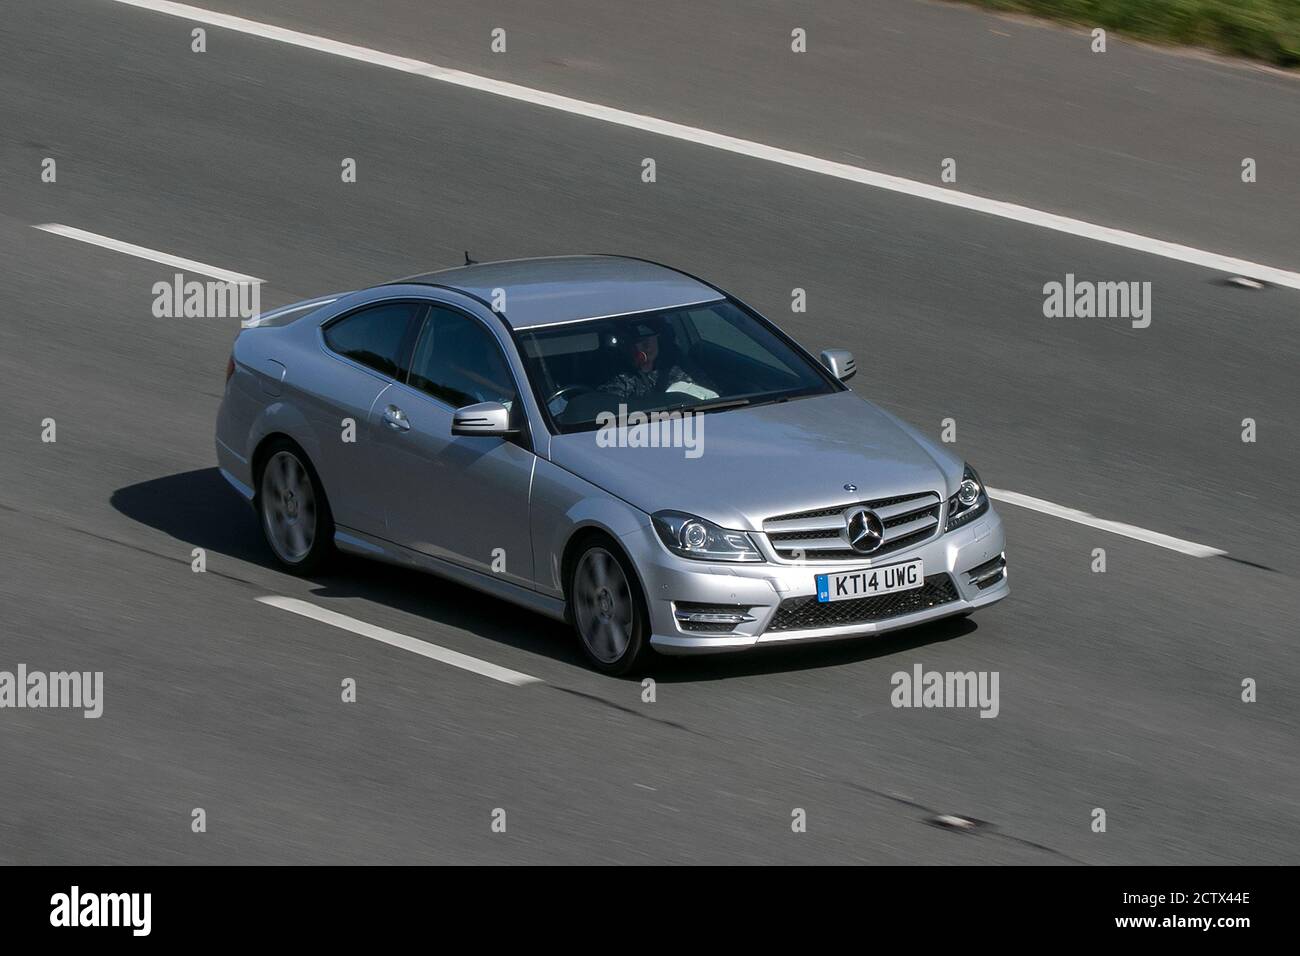 2014 Mercedes-Benz C250 Amg Sport Edt Prem Silver Car Coupe Diesel driving on the M6 motorway near Preston in Lancashire, UK. Stock Photo